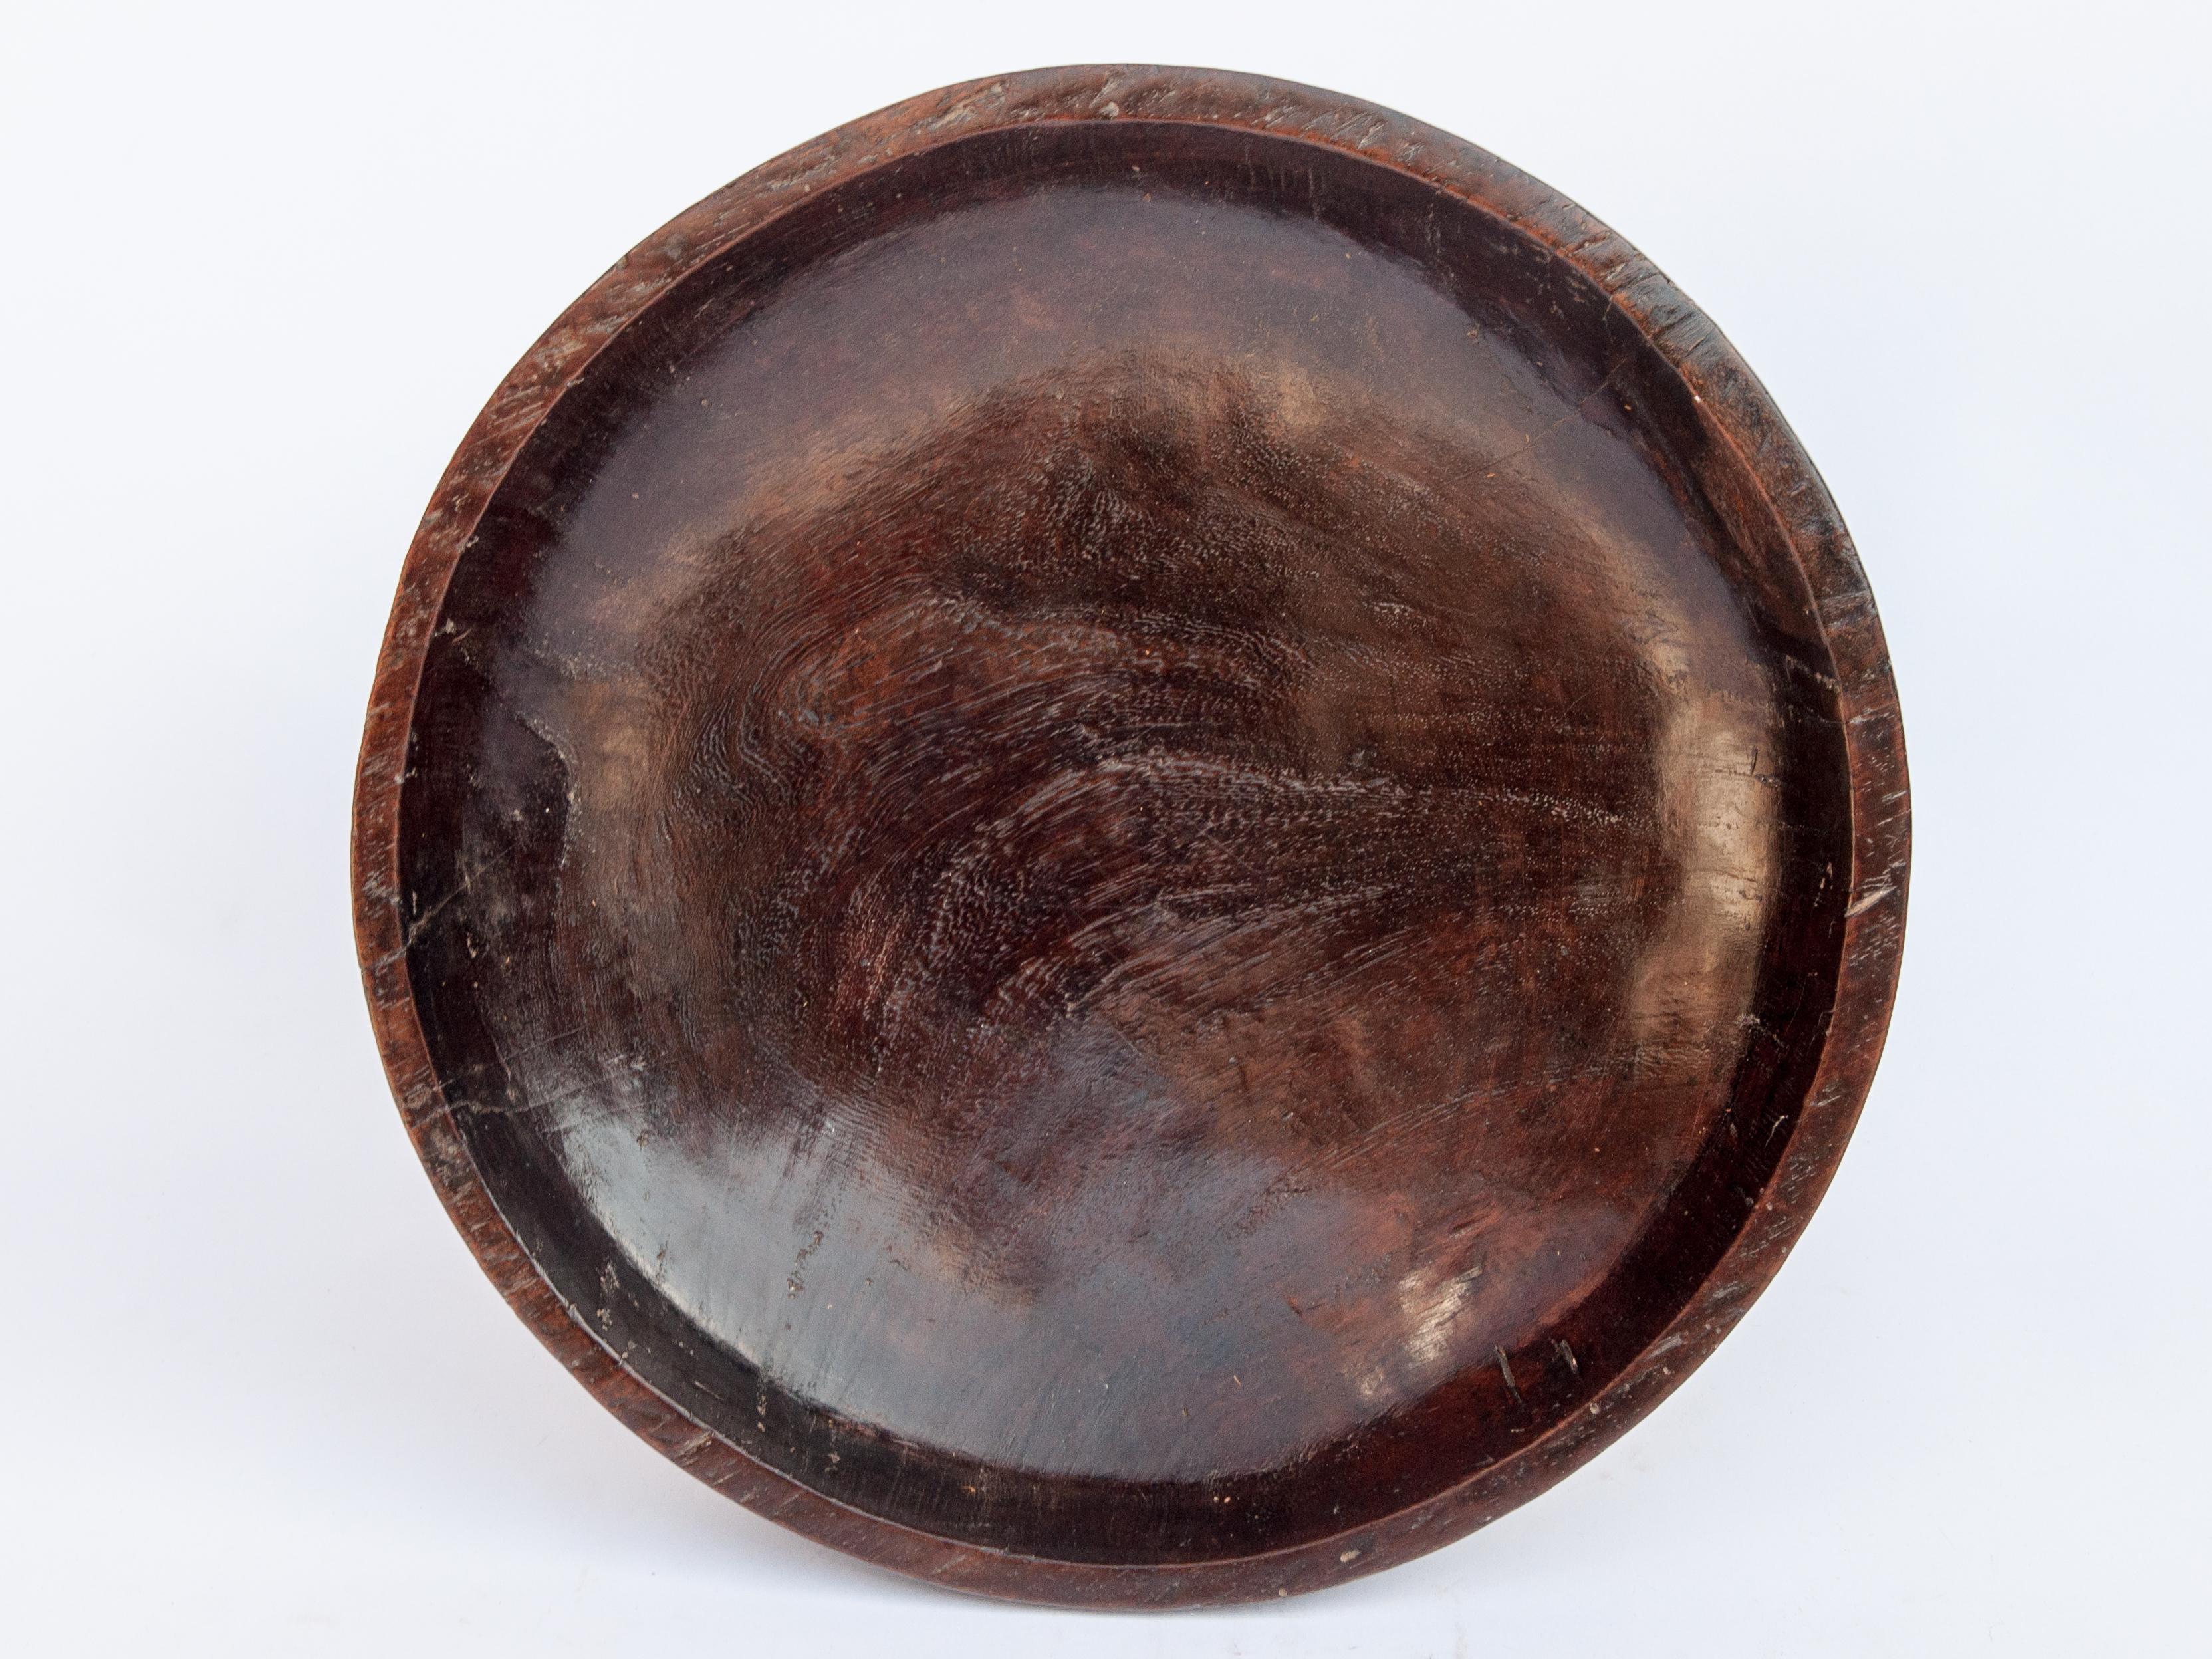 Hand-Carved Vintage Wood Bowl on Stand from Sulawesi, Indonesia, Mid-20th Century